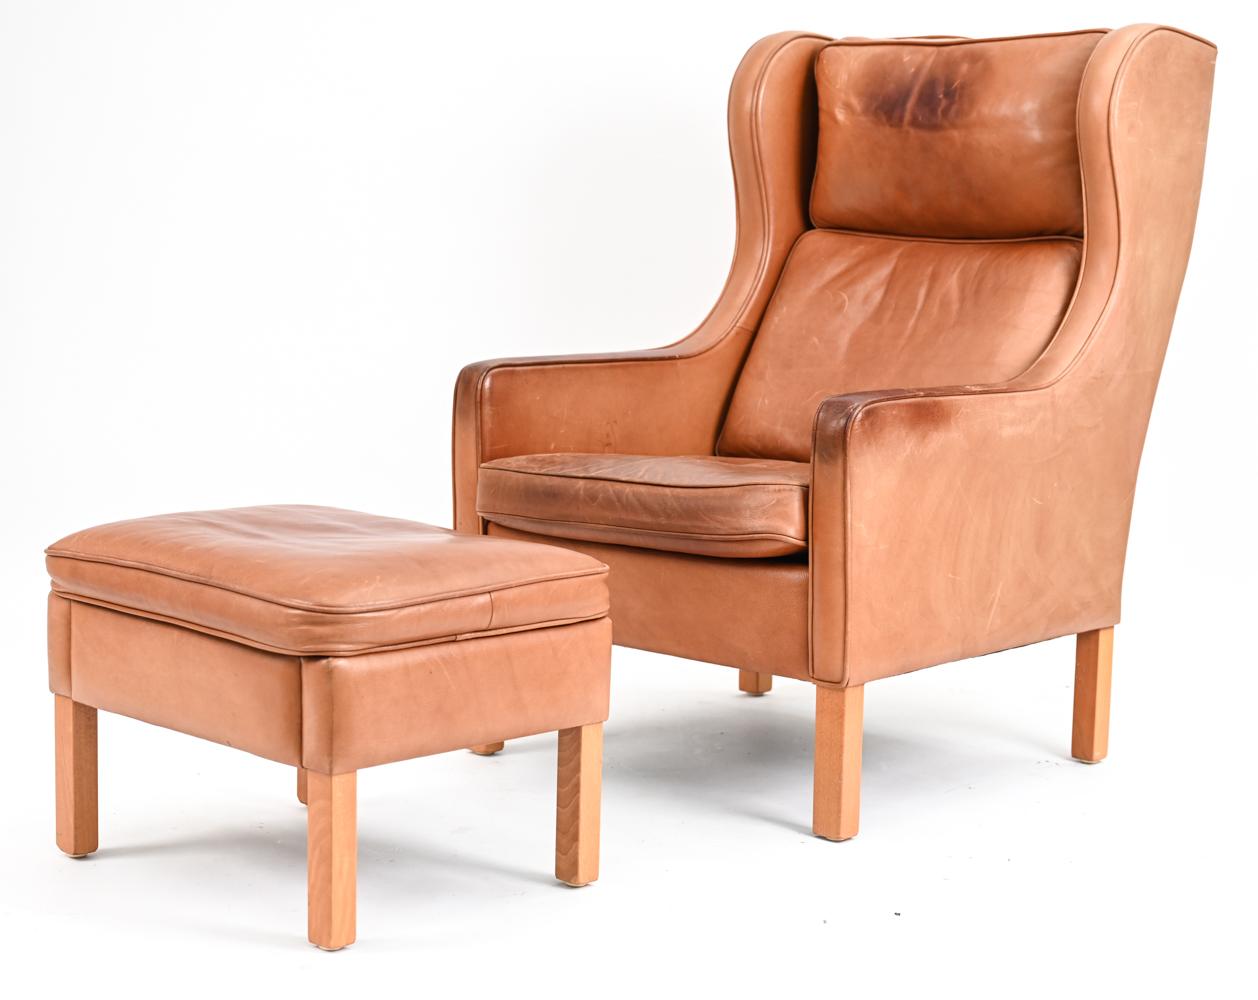 Handsome and indelibly comfortable, the Model 195 wingback chair by Mogens Hansen features an unmistakably Danish silhouette, with shelter-style wings that extend seamlessly into sloped track arms. A gently reclined back, plush removable cushions,